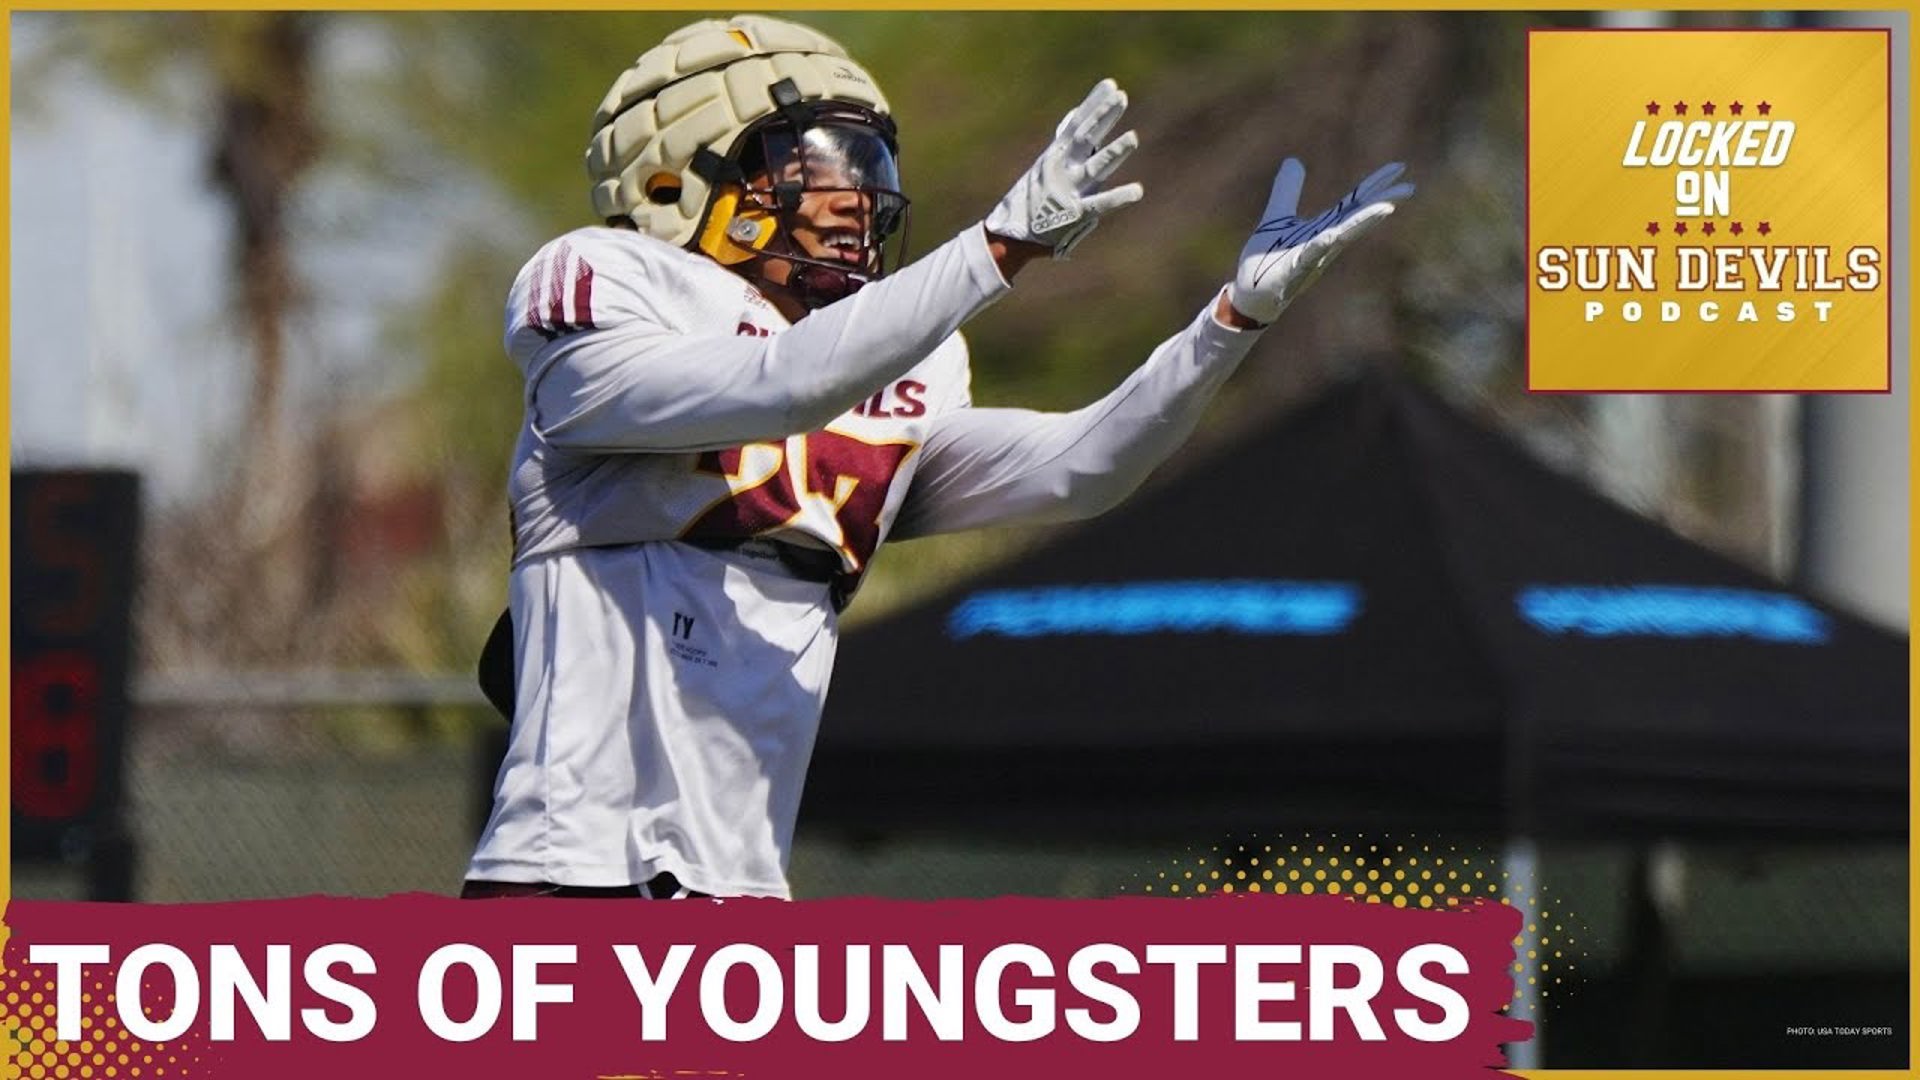 Host Richie Bradshaw breaks down all of these guys and several other defensive standouts for Arizona State Sun Devils football now that spring practices have closed.